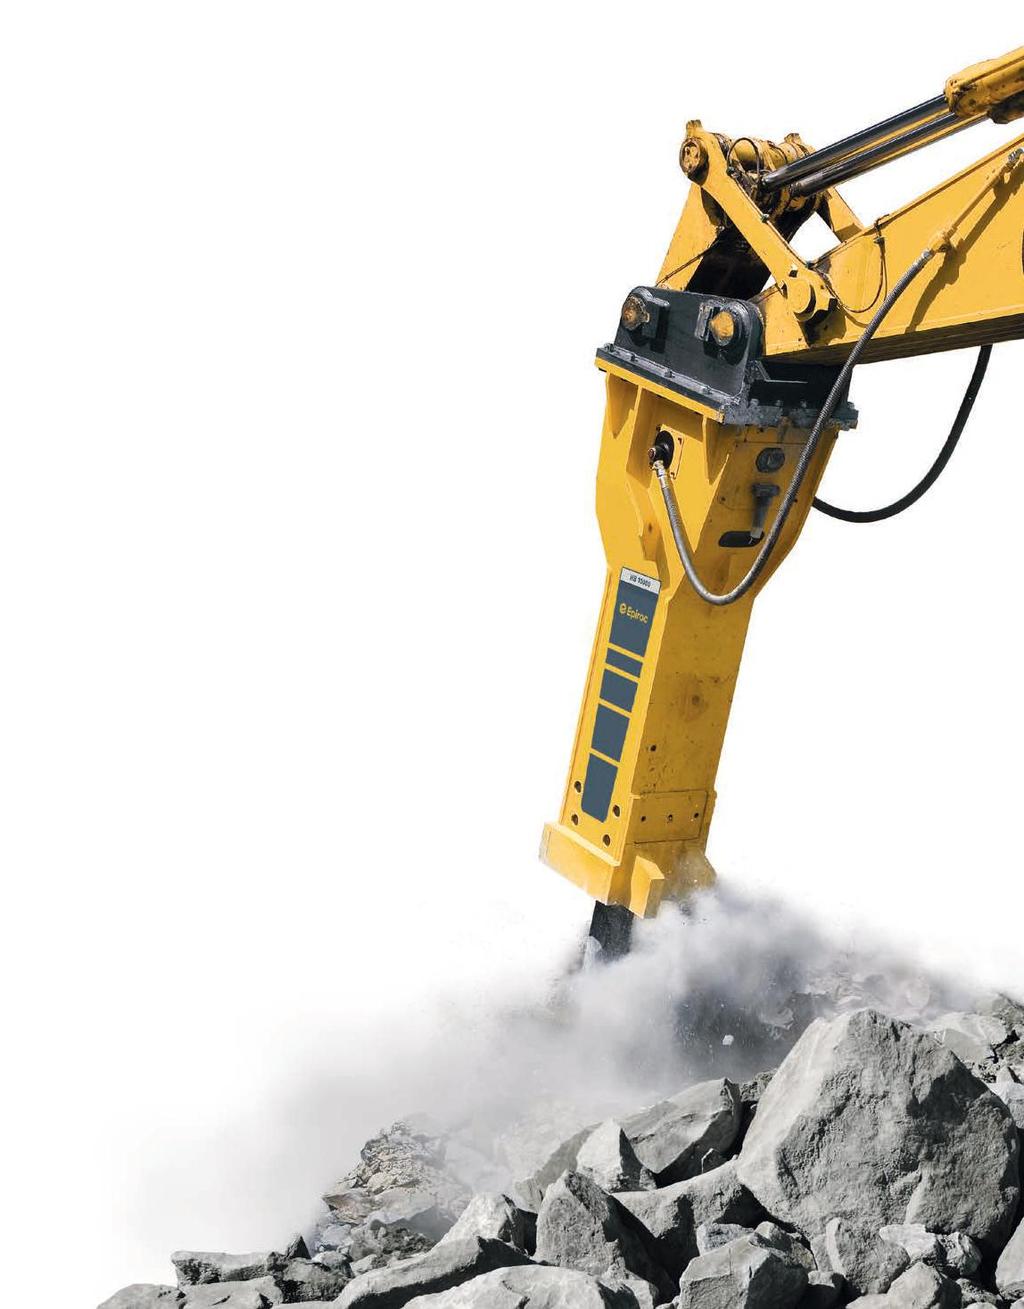 Time to change the industry. Again. Welcome to Epiroc. We created the first-ever hydraulic breaker.